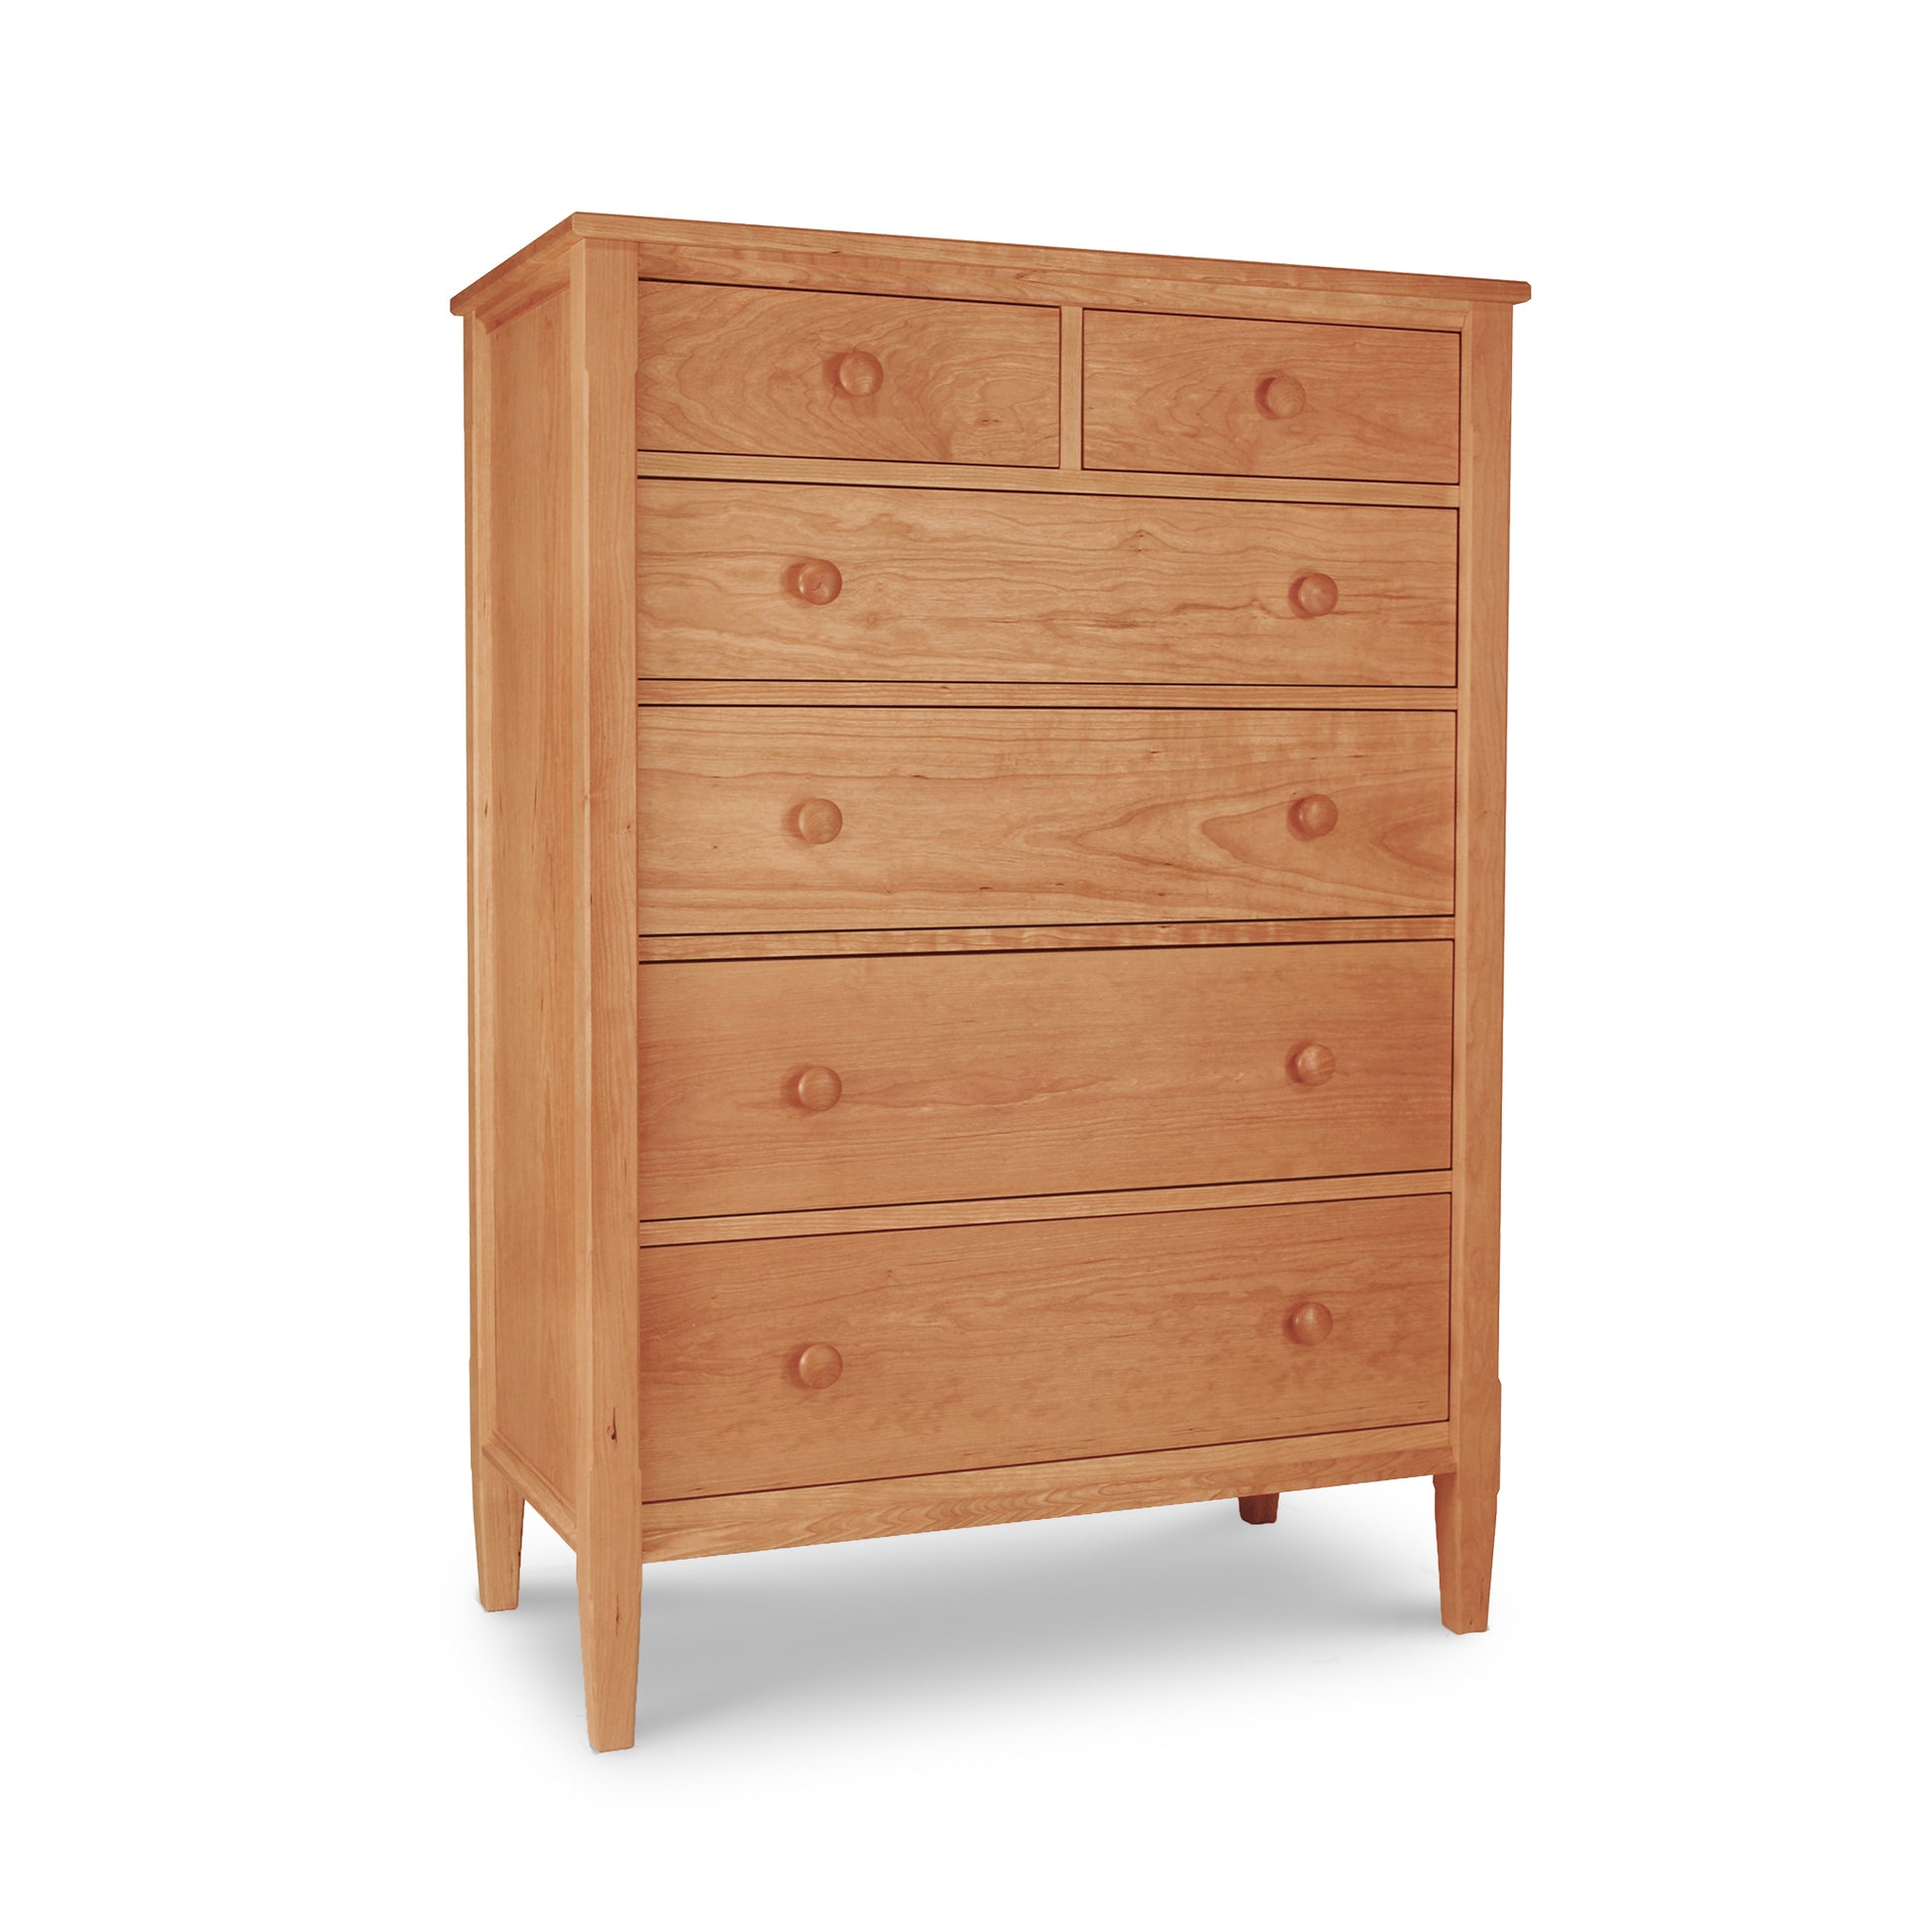 A Maple Corner Woodworks Vermont Shaker 6-Drawer Chest made of hardwoods, providing ample bedroom storage, showcased on a white background.